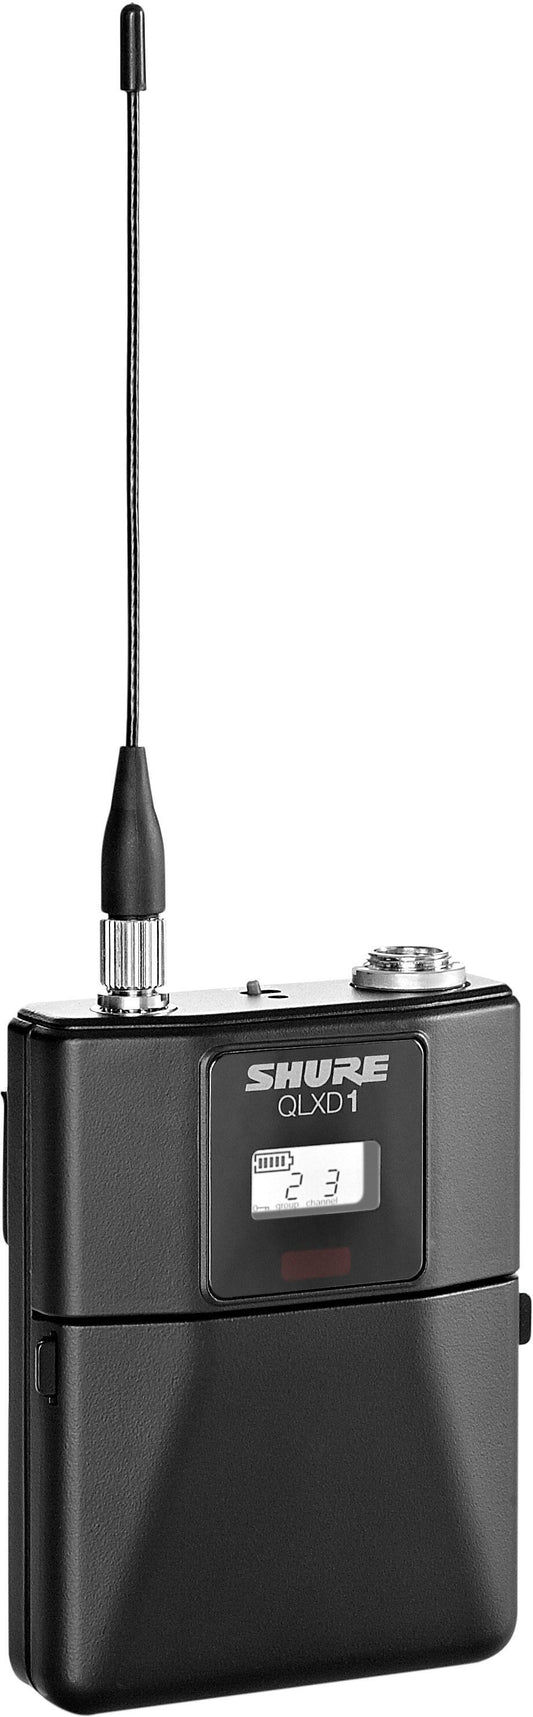 Shure QLXD14/85 Wireless System with WL185 Lavalier Microphone, Band H50 (534 - 598 MHz)